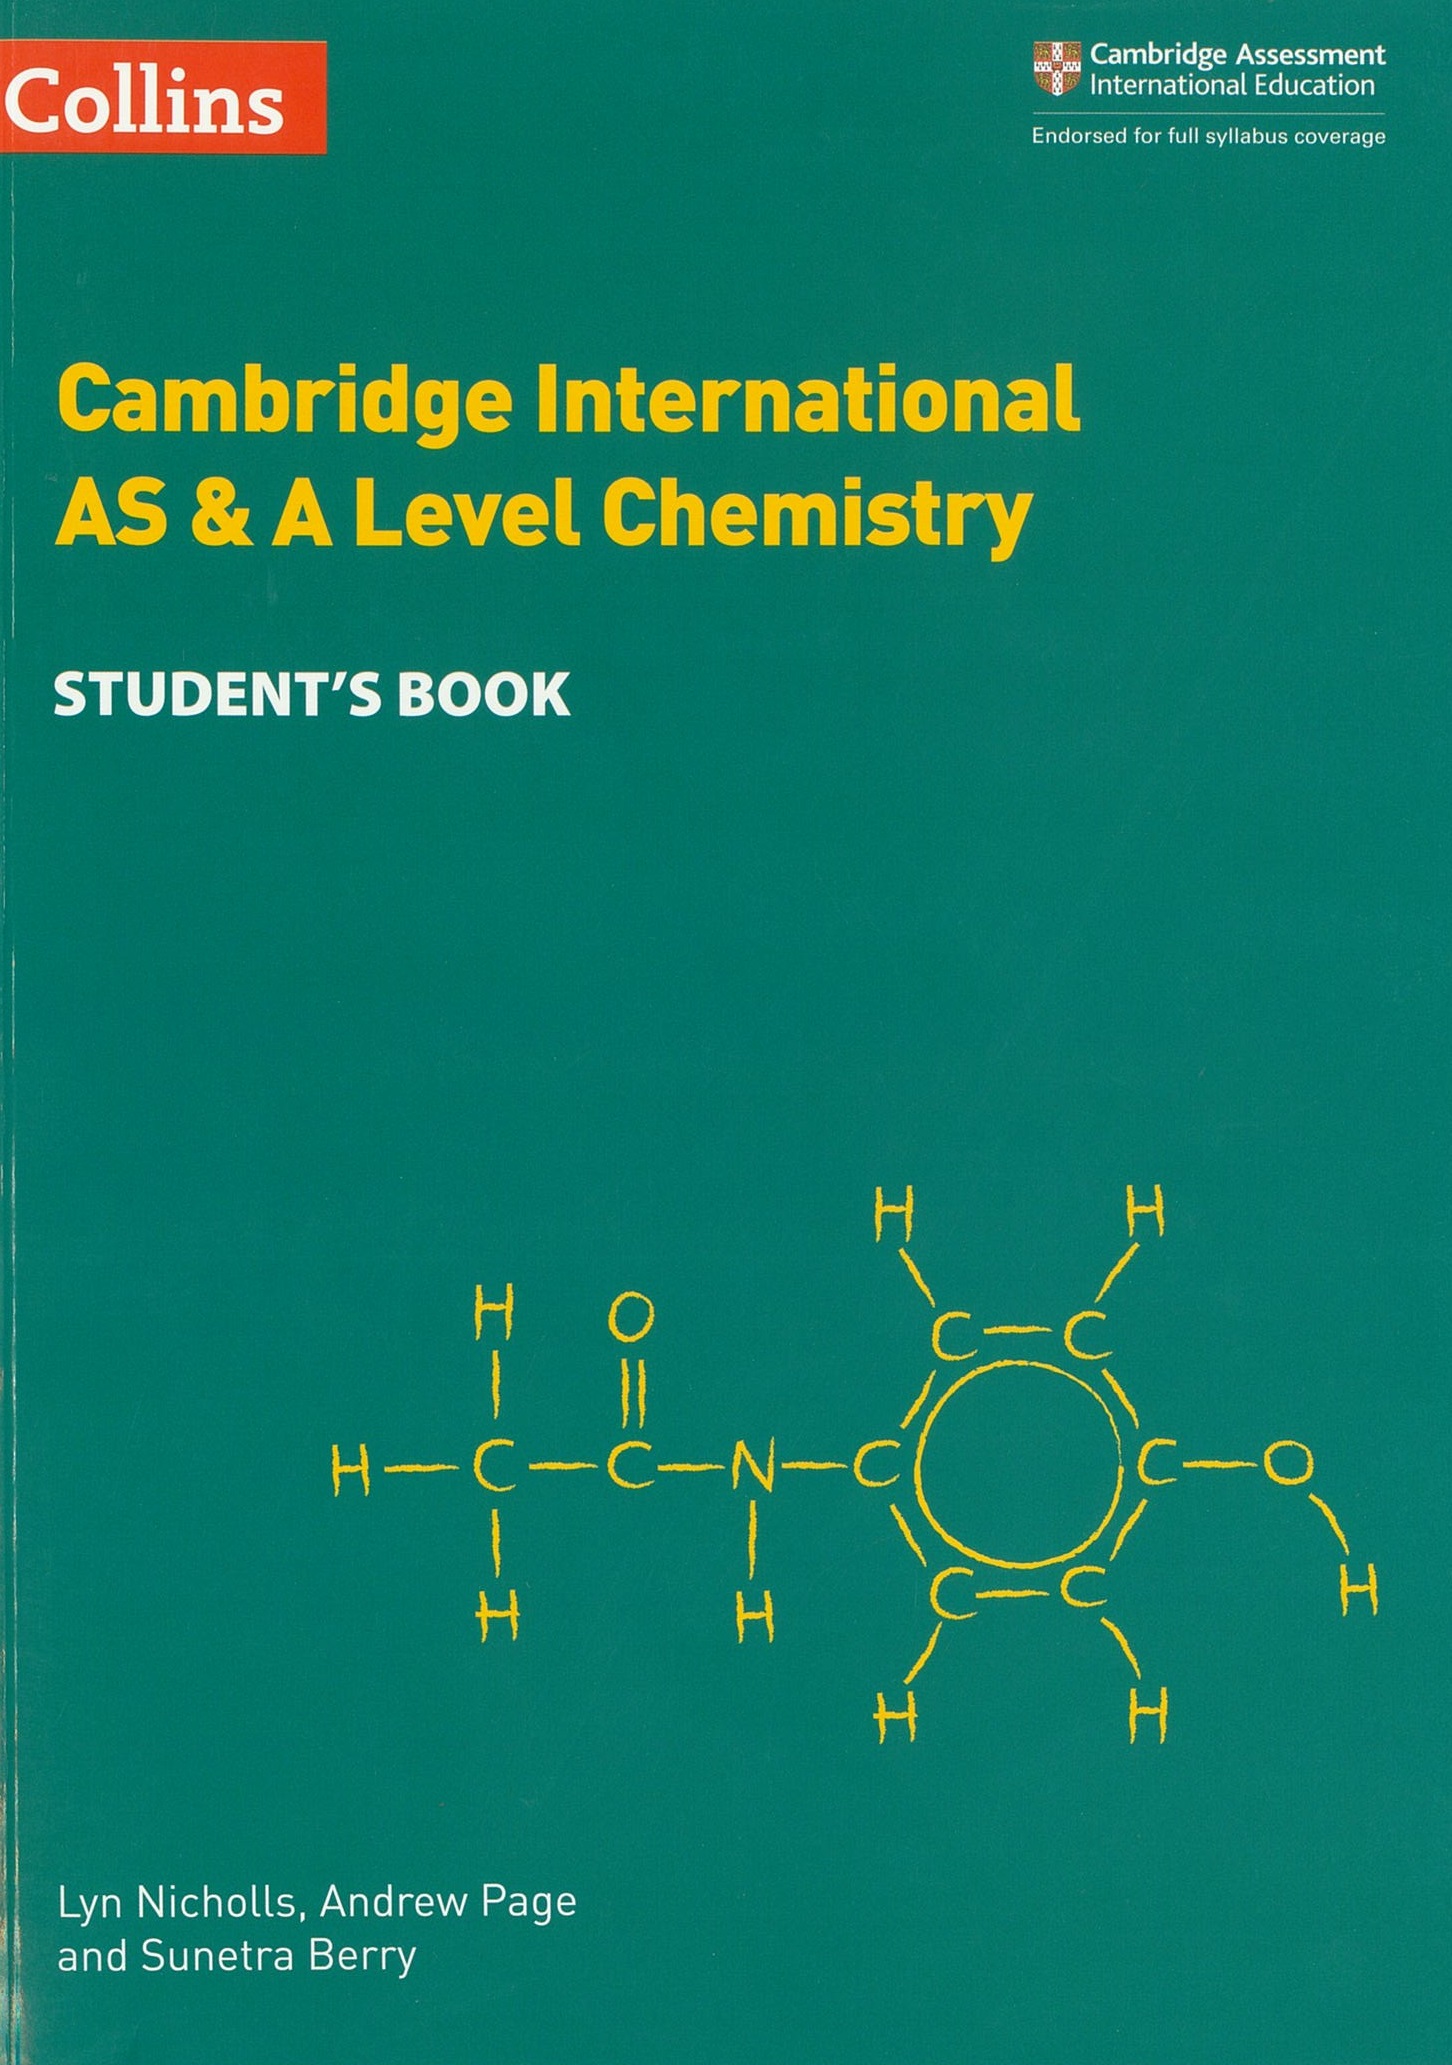 COLLINS - AS & A LEVEL CHEMISTRY  STUDENT'S BOOK - NICHOLLS & PAGE